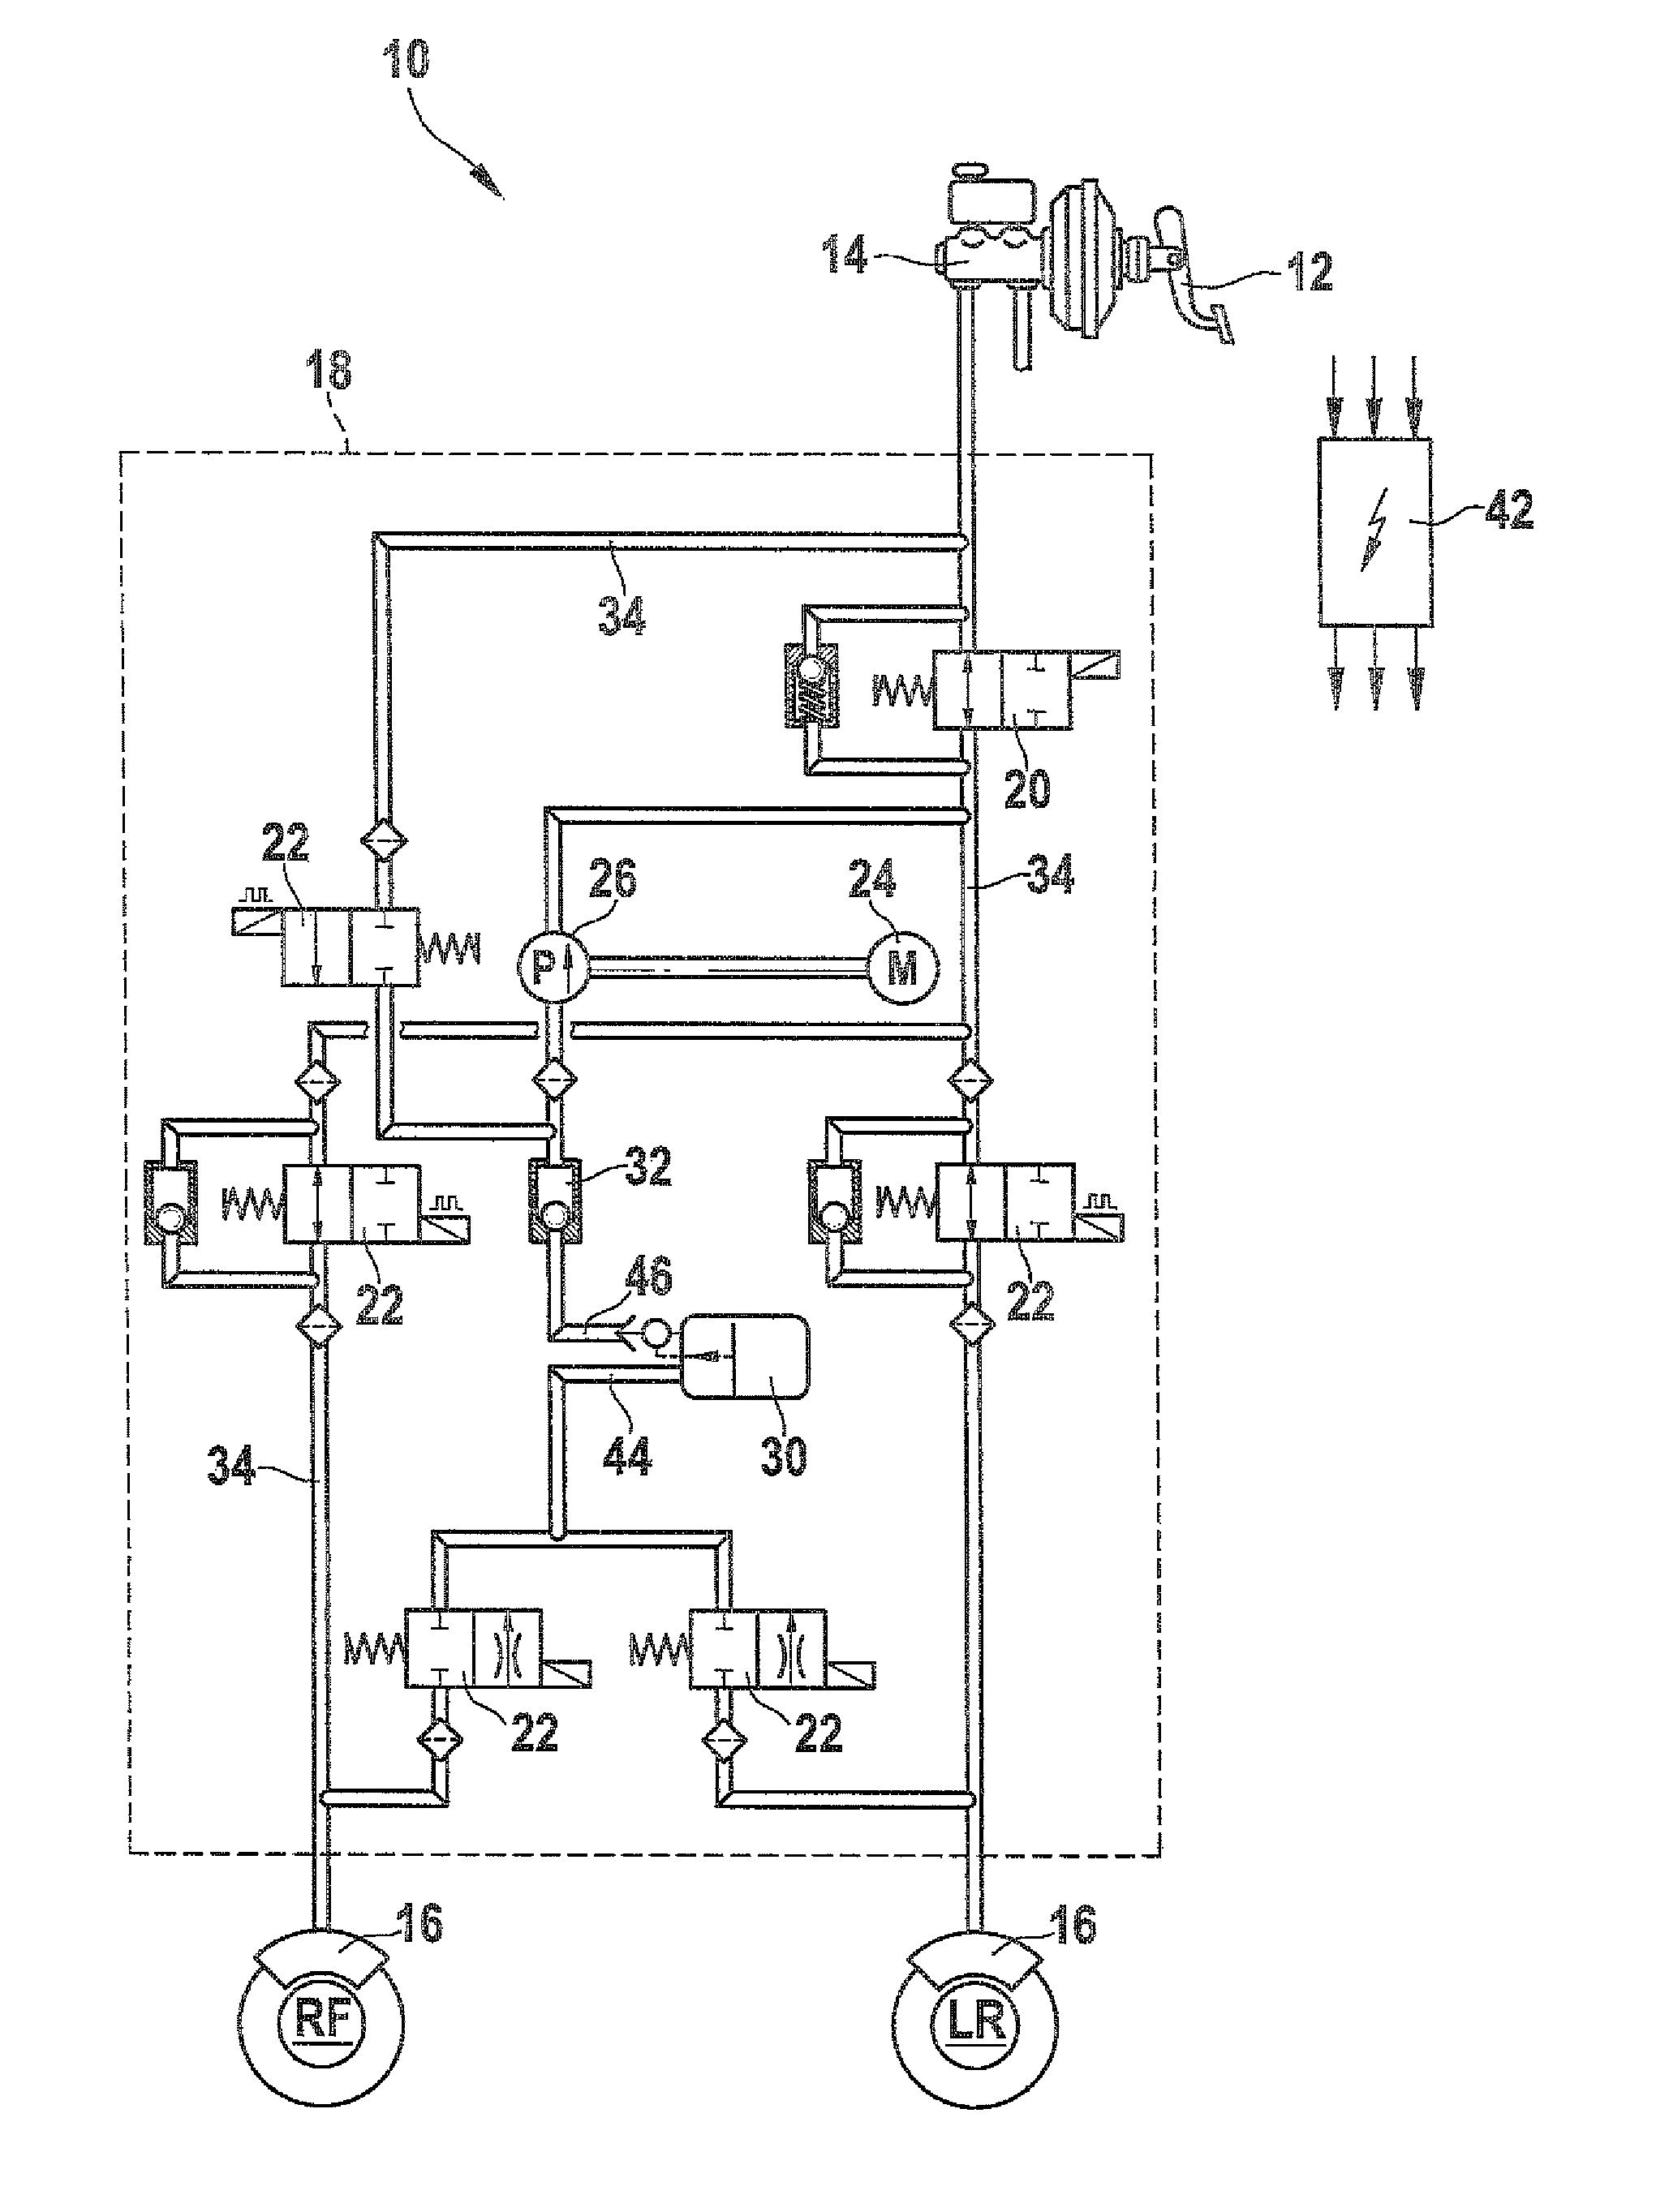 Hydraulic vehicle brake system having a service brake which can be actuated by muscle force and having a device for regulating the wheel slip